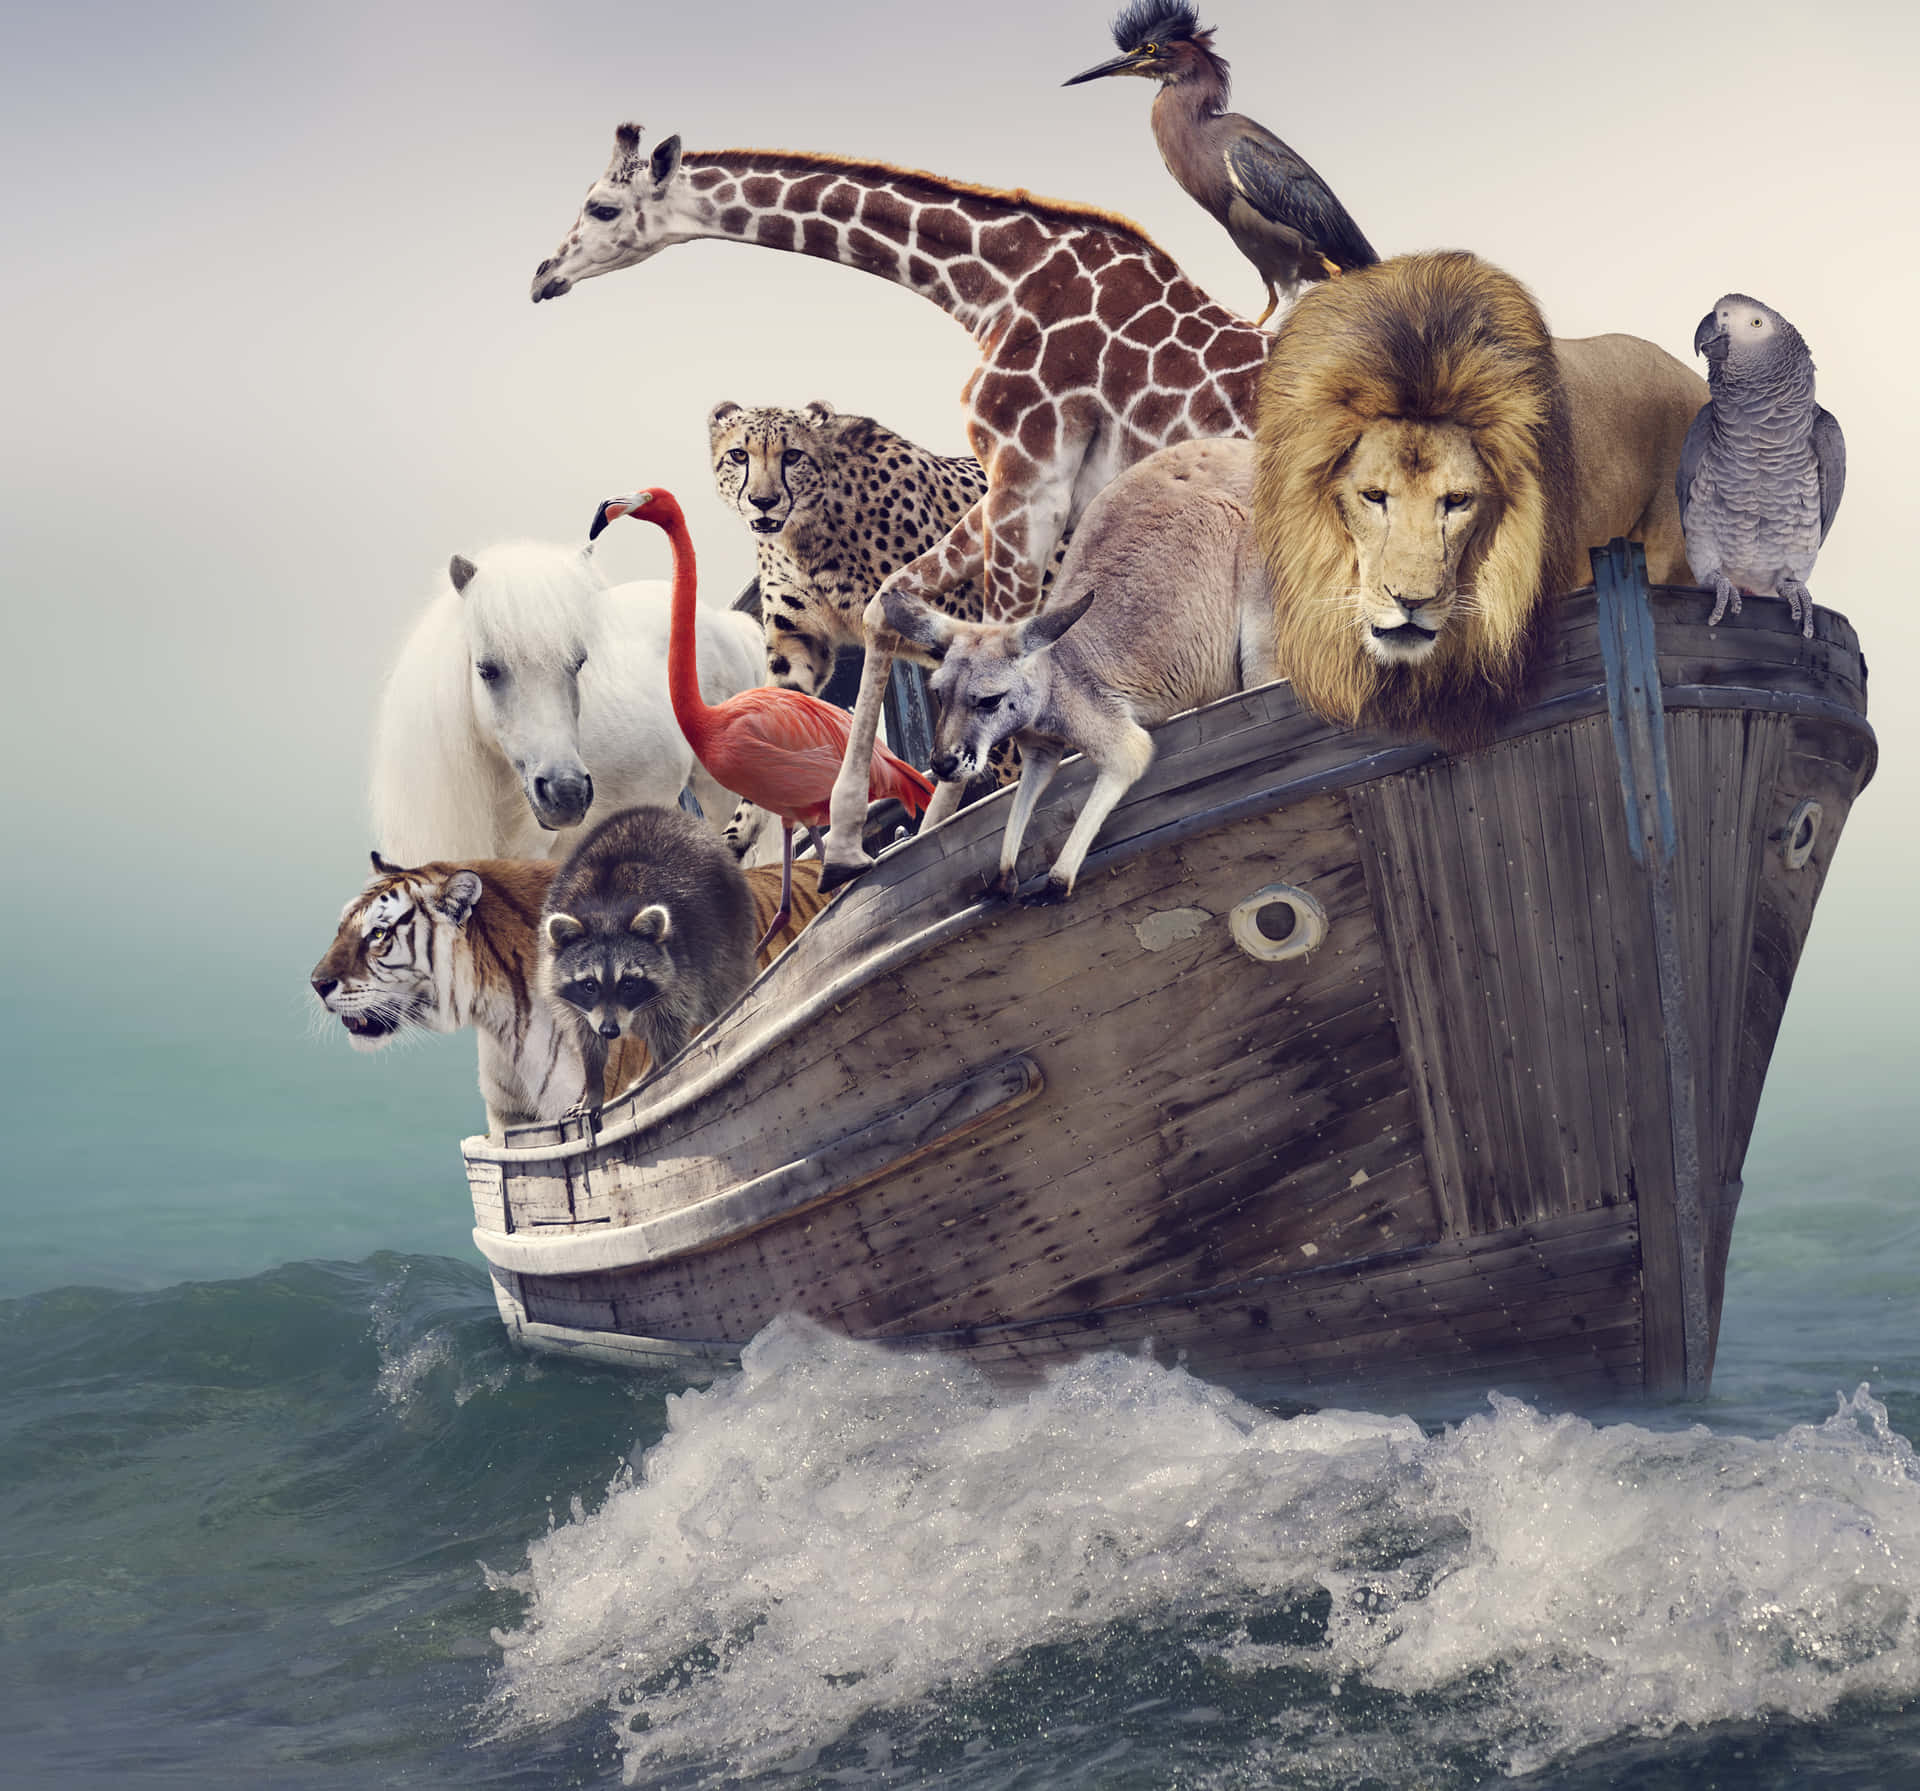 A Boat With Many Animals On It